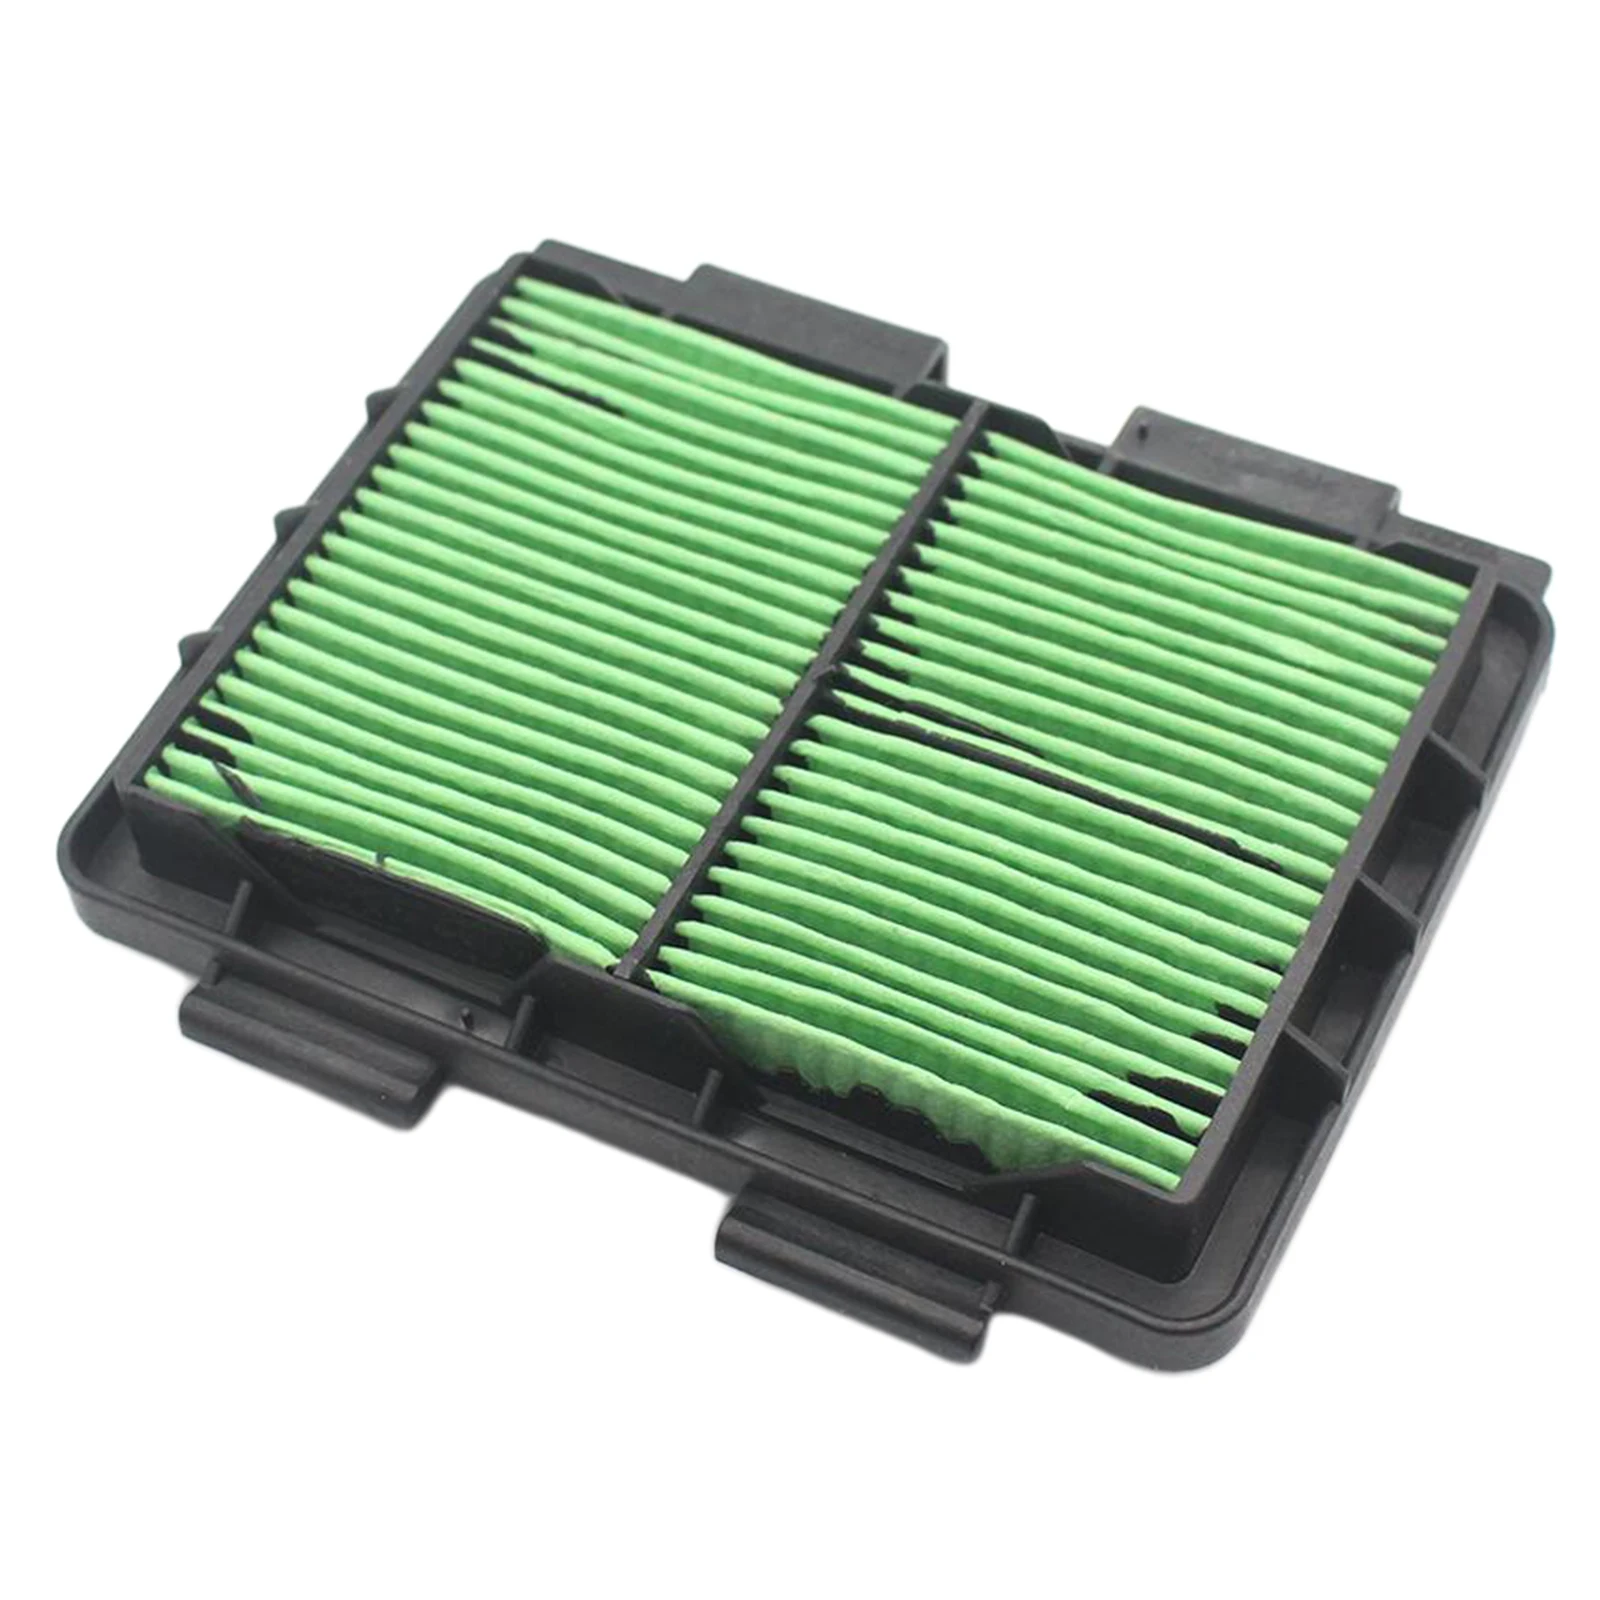 Motorbike Air Filter Cleaner for HONDA CRF250L CRF250 2013 -2016, High quality Durable Material